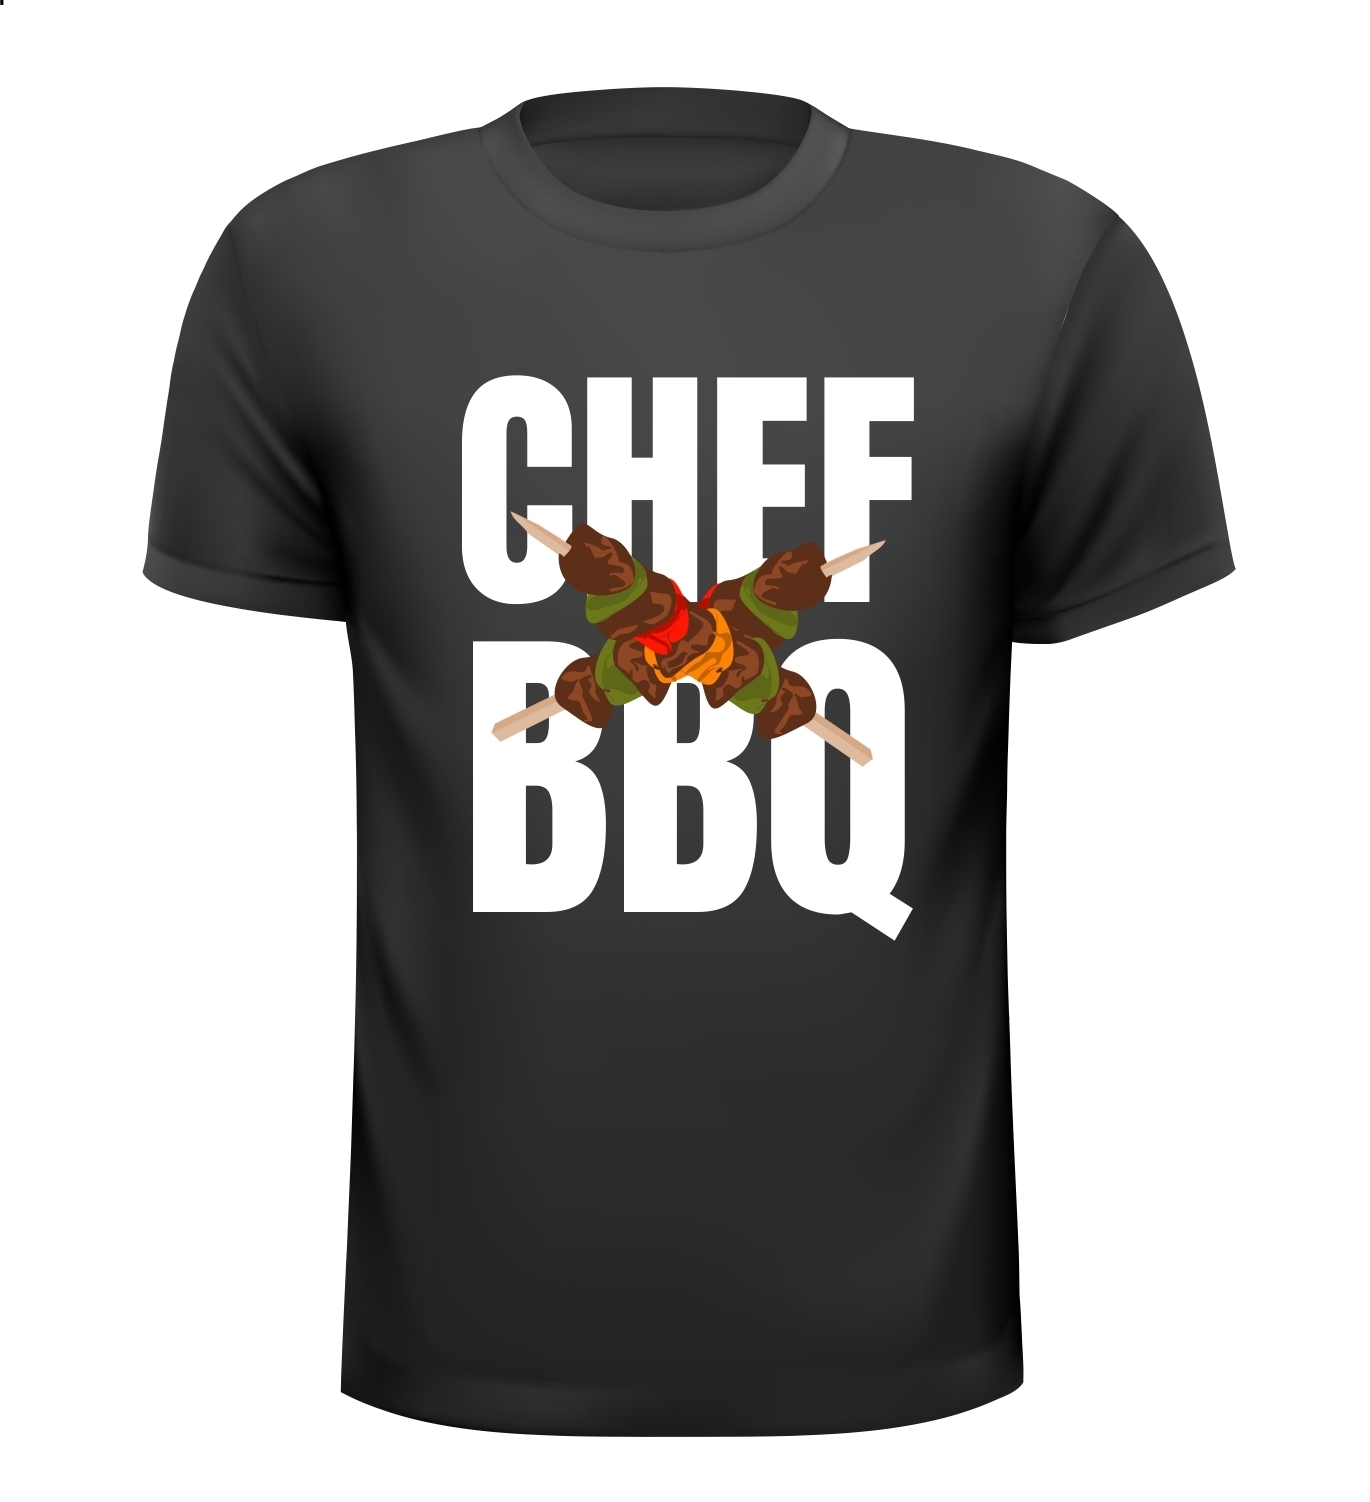 Shirtje voor chef BBQ. Chef barbecue